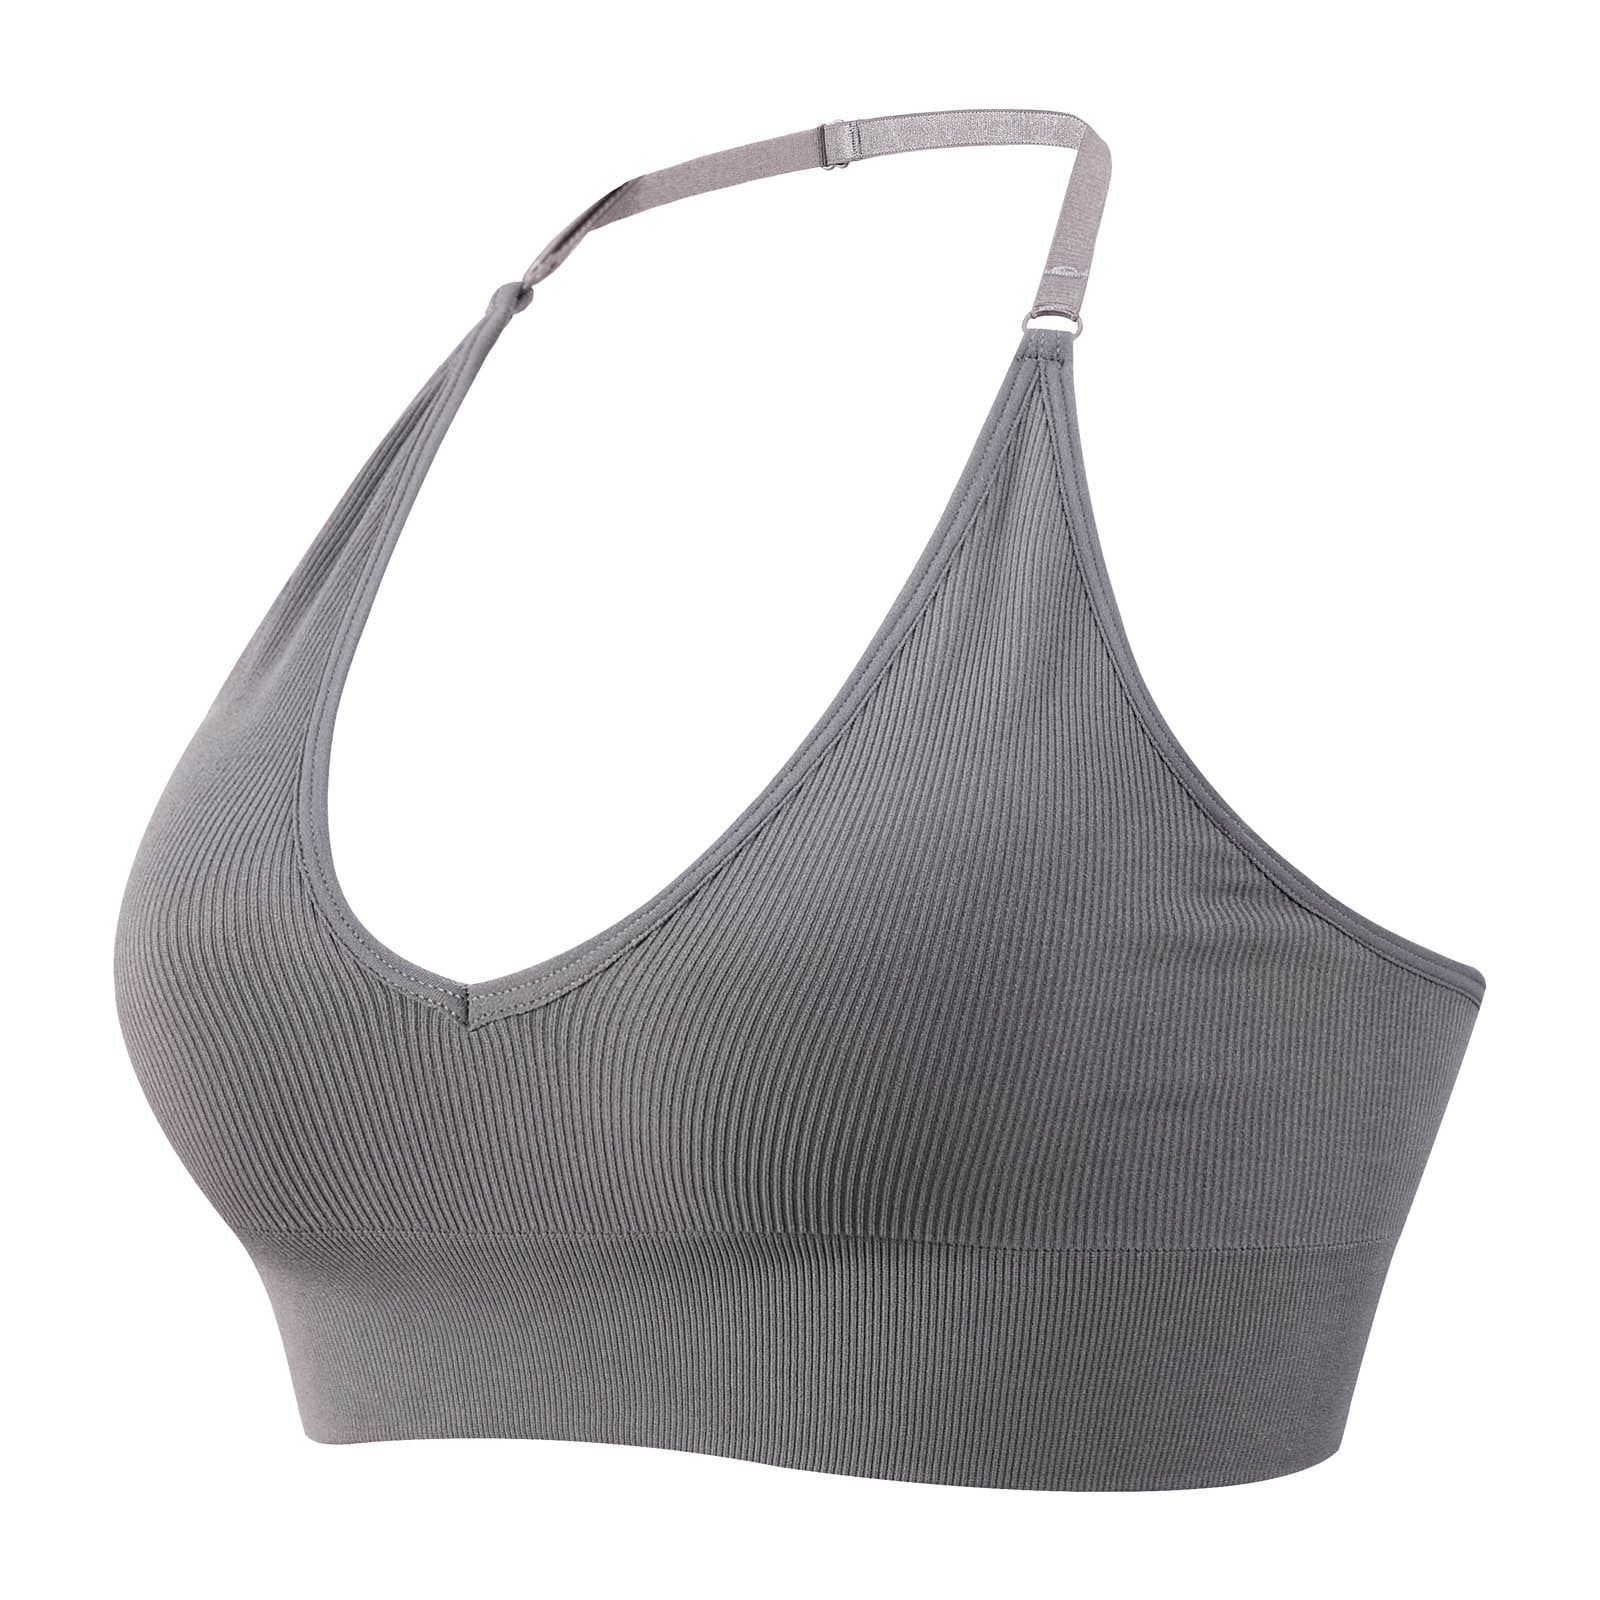 Mrat Clearance Strapless Bras Clearance Women's Sports